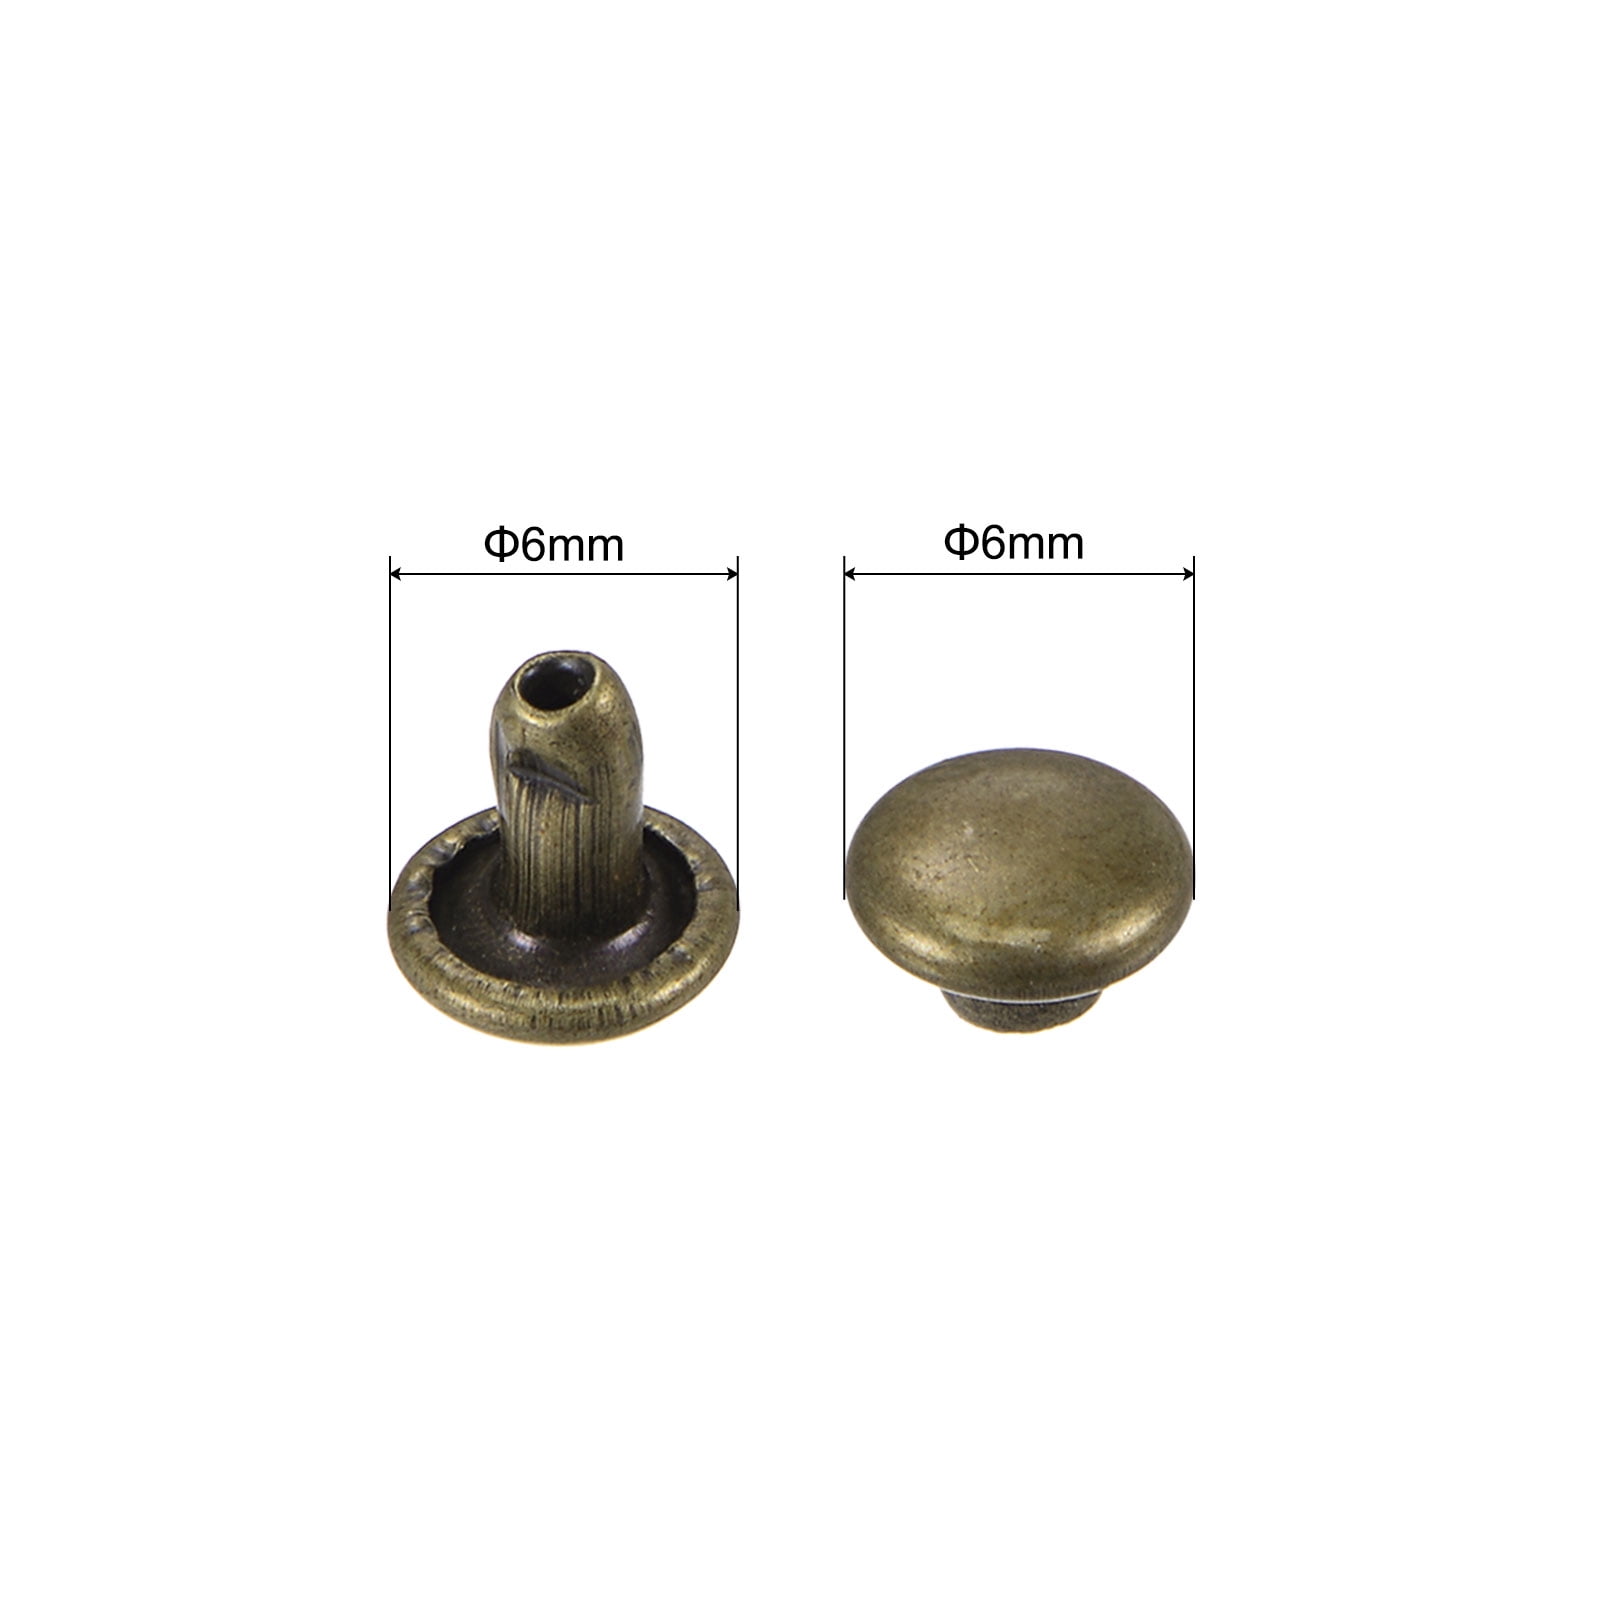 TierraCast Antiqued Brass Plated Leather Rivets, 1/8 dia (10 Pieces)